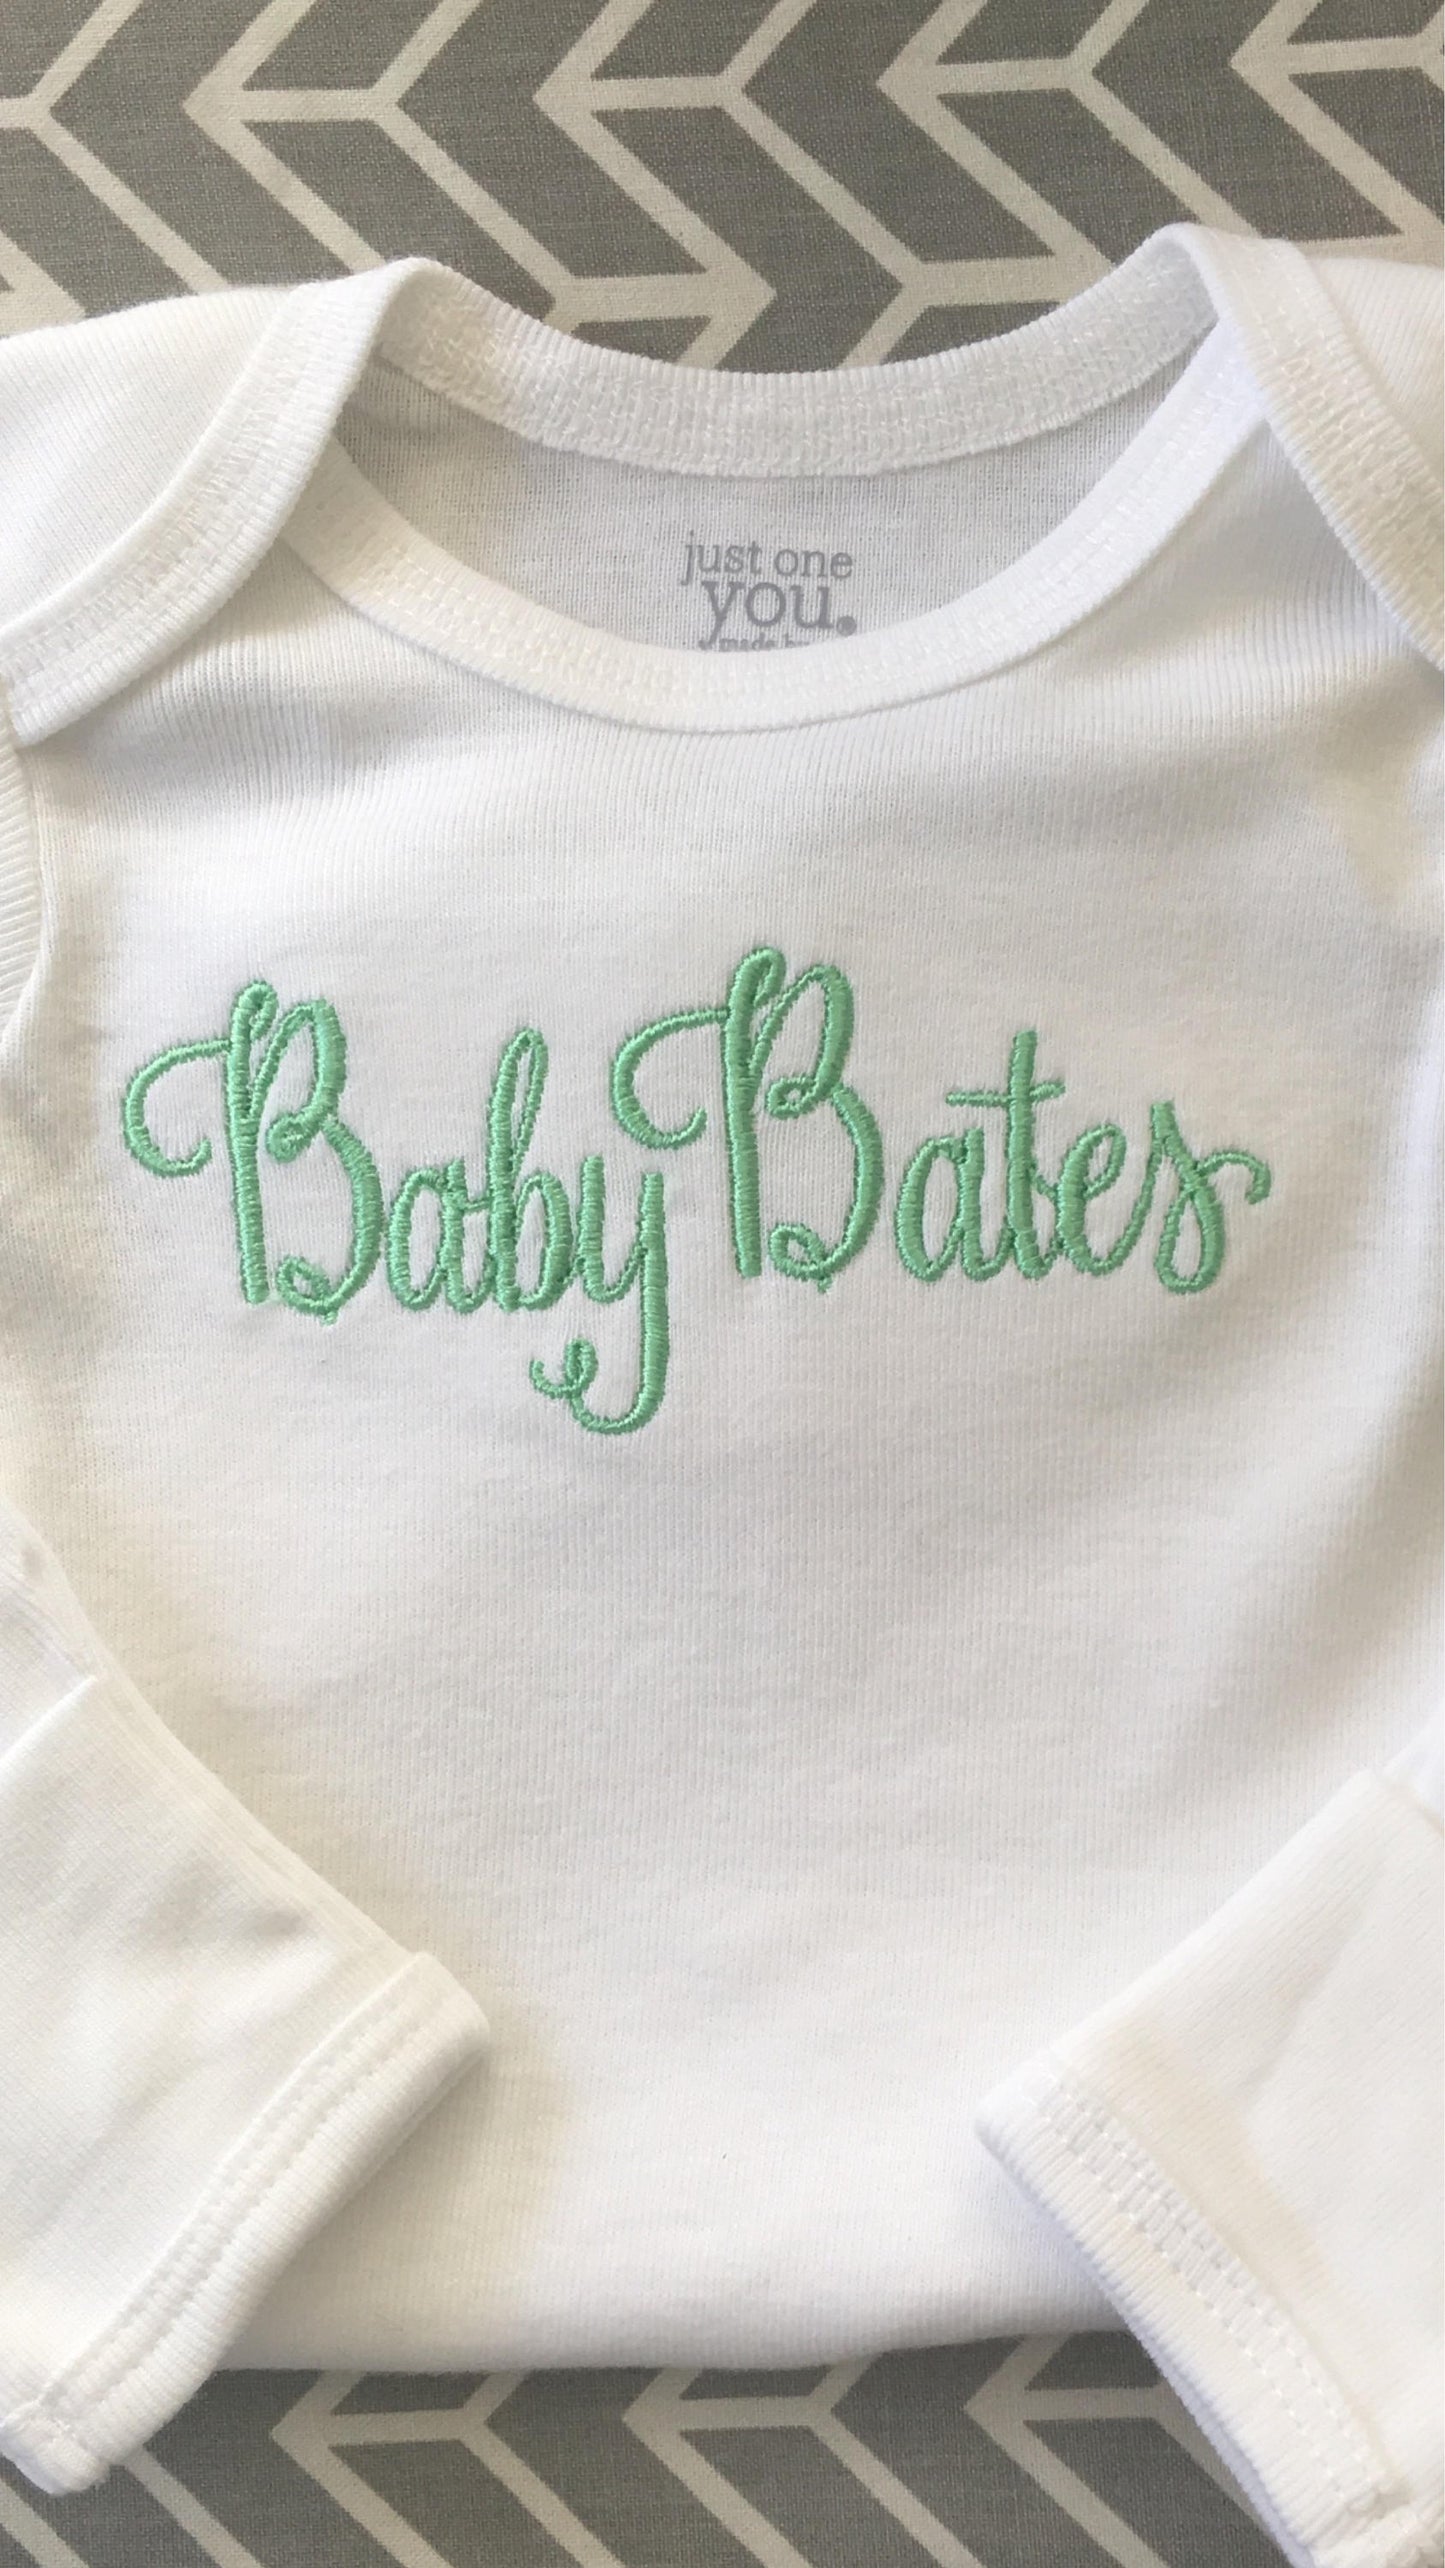 Baby girl coming home outfit, newborn coming home outfit, hospital outfit, monogrammed one piece bodysuit, girls name bodysuit